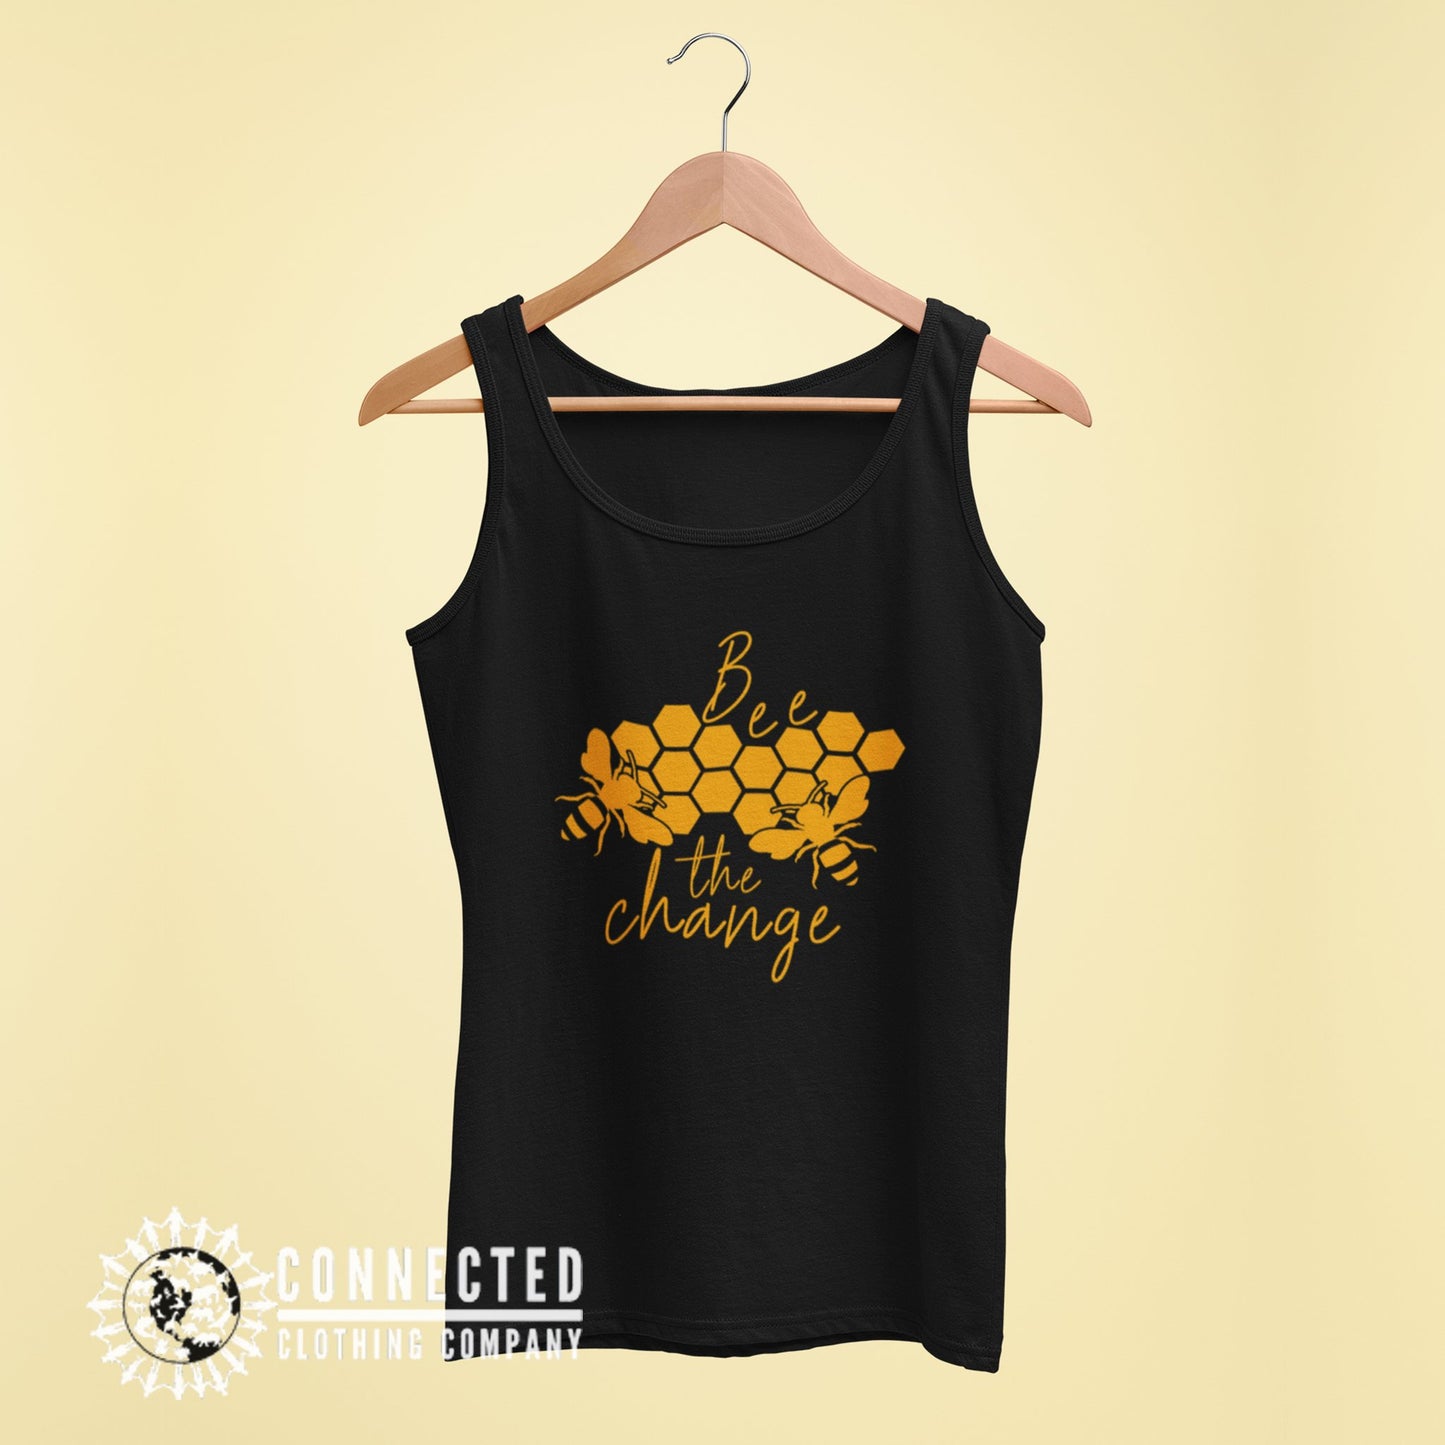 Black Bee The Change Women's Tank - Connected Clothing Company - 10% of profits donated to the Honeybee Conservancy